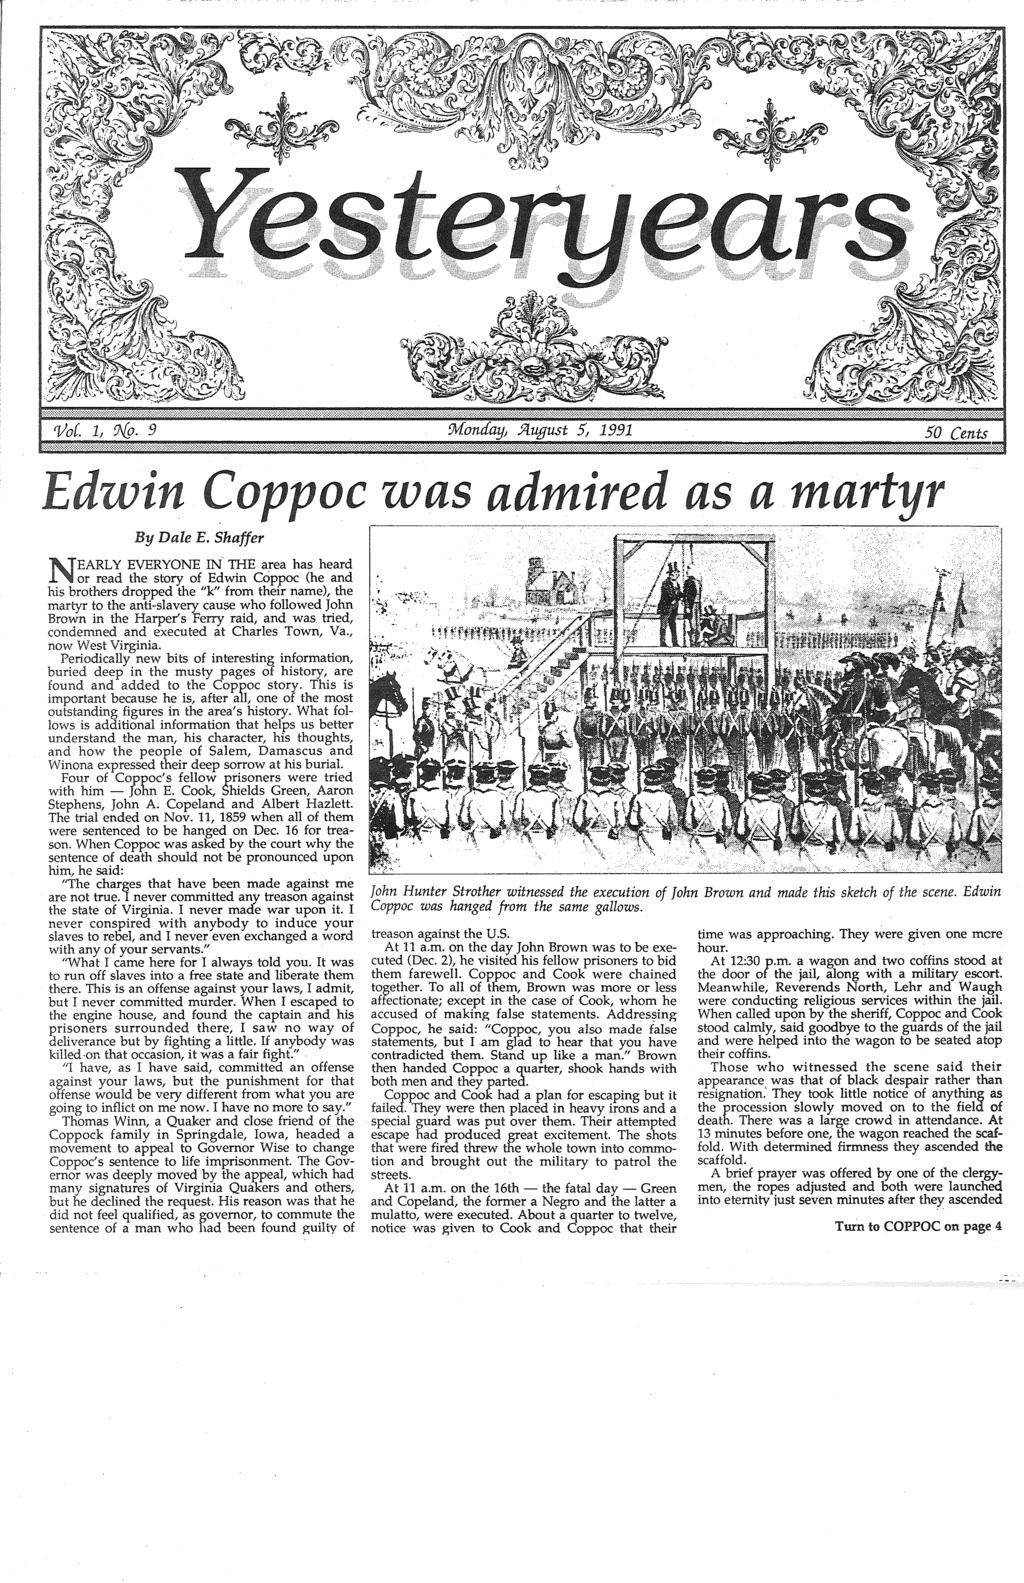 Edwin Coppoc was admired as a maryr By Dale E.